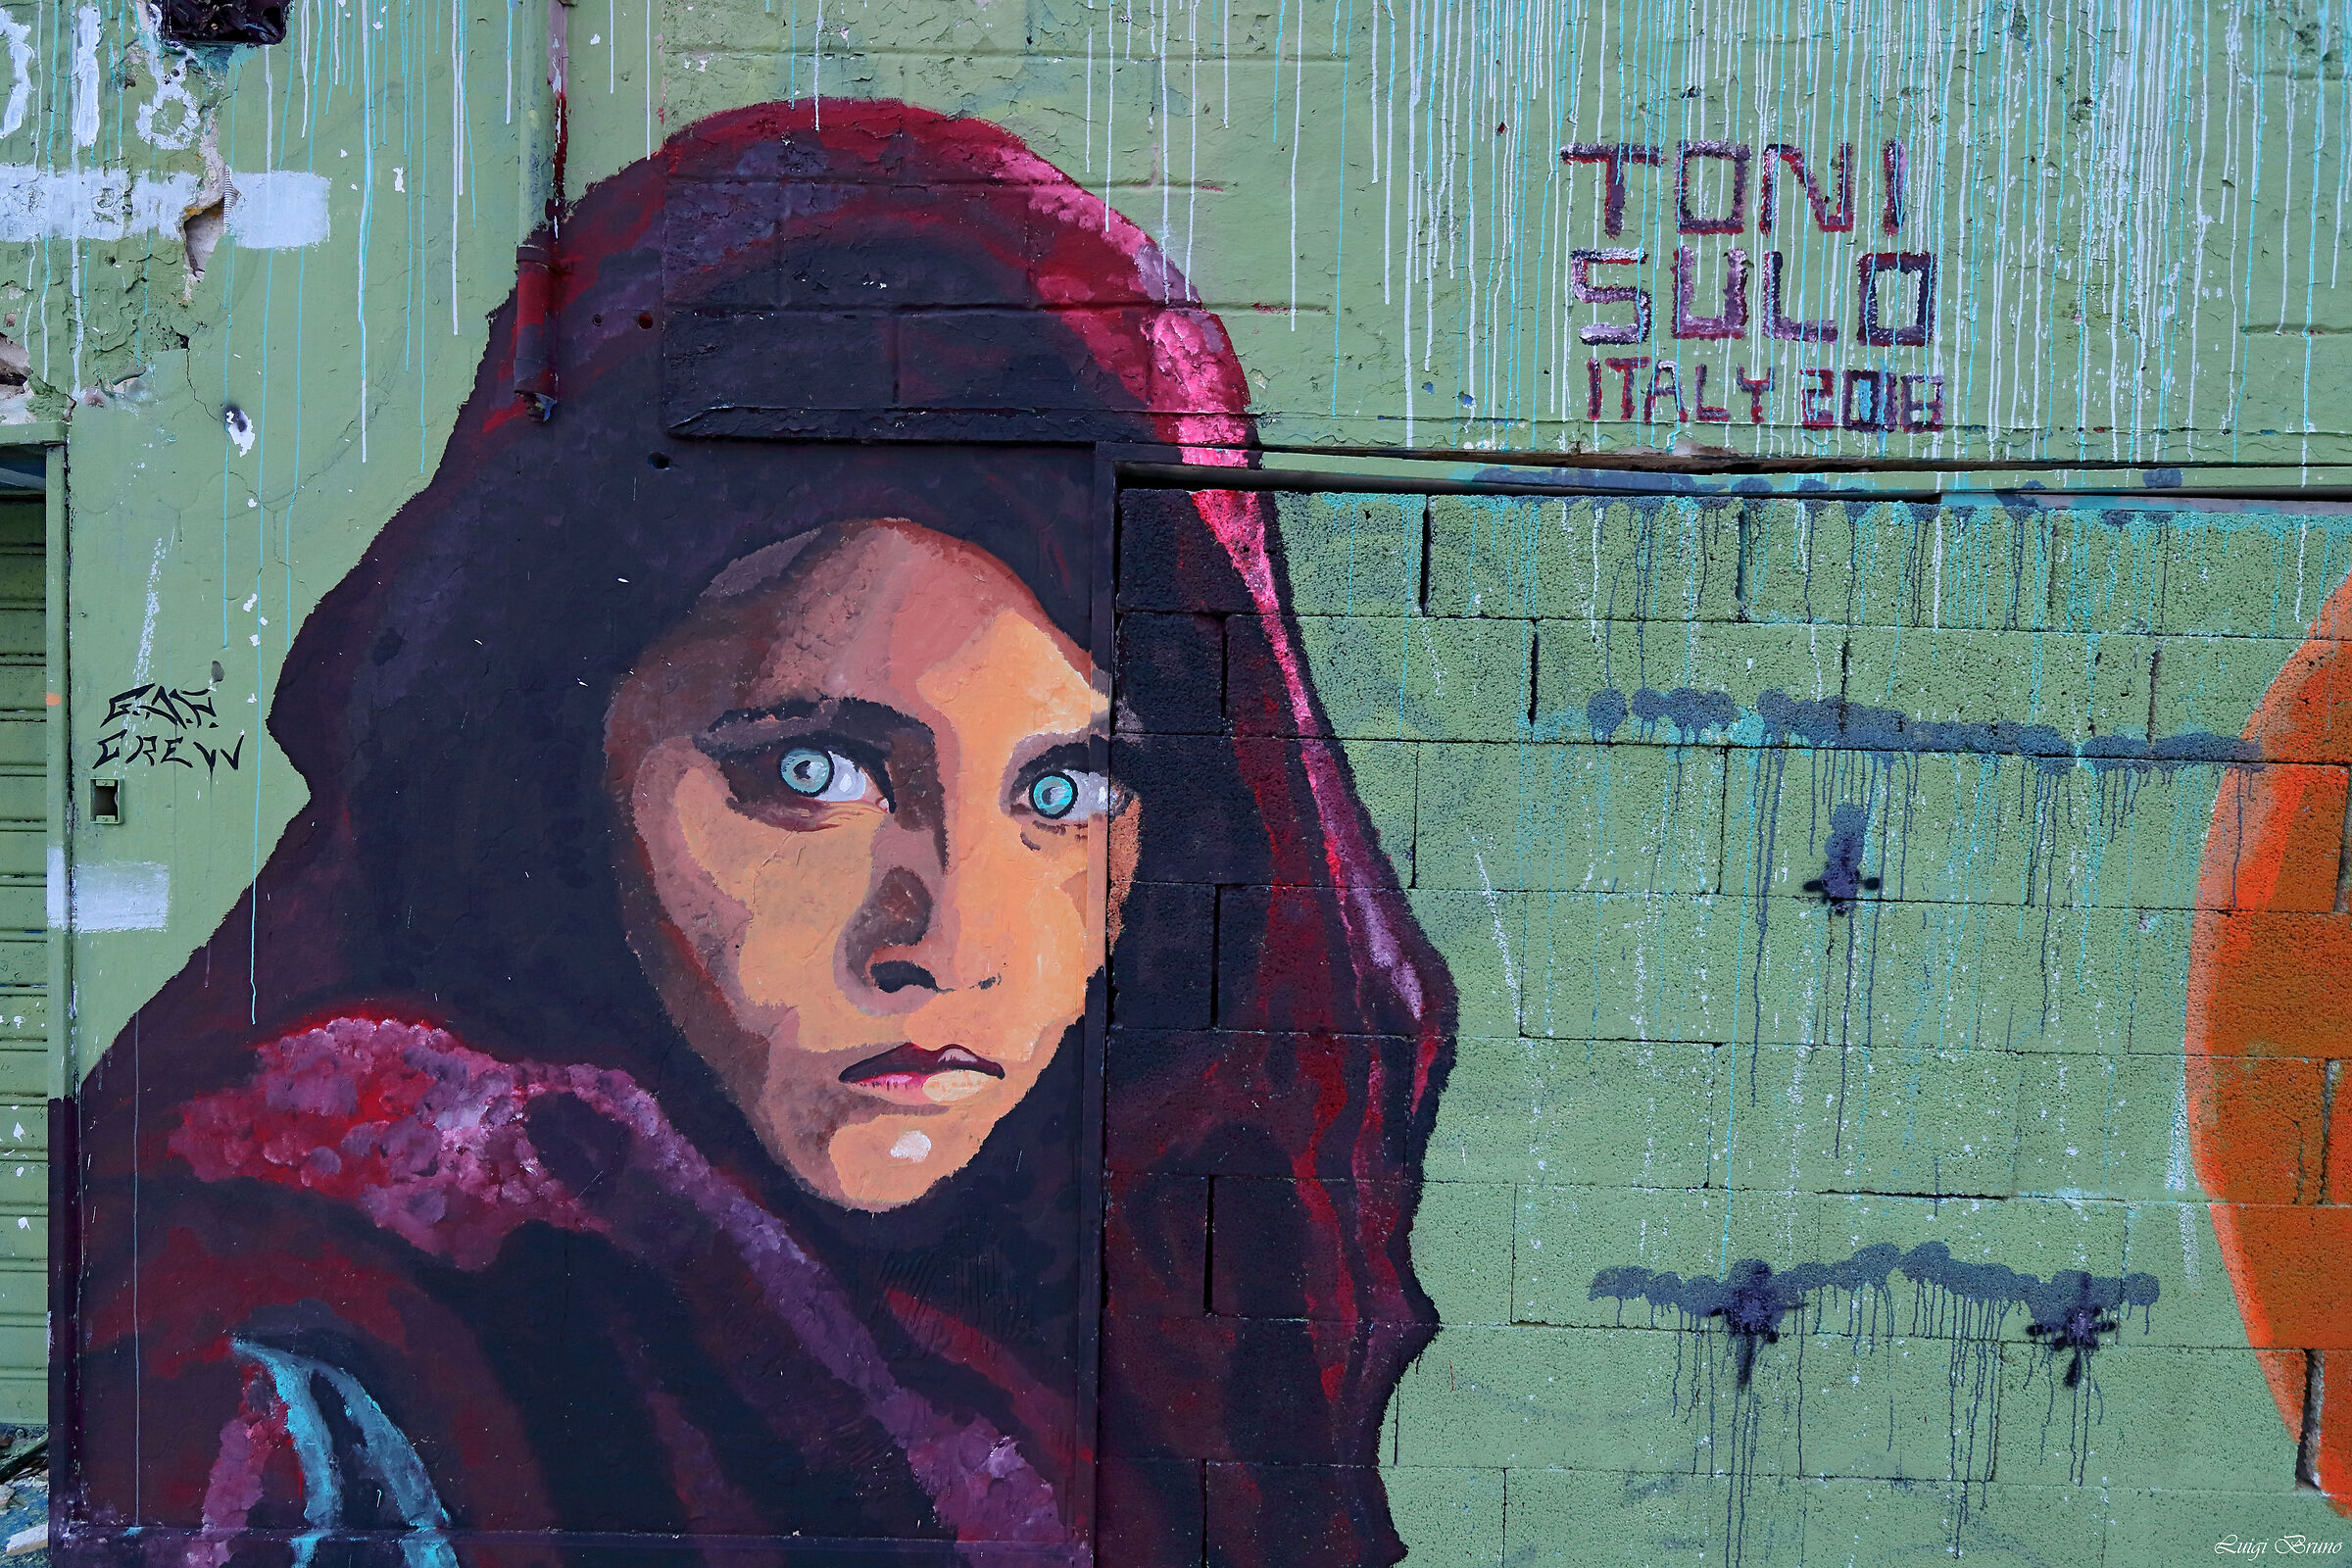 The Wall of the Afghan Girl...